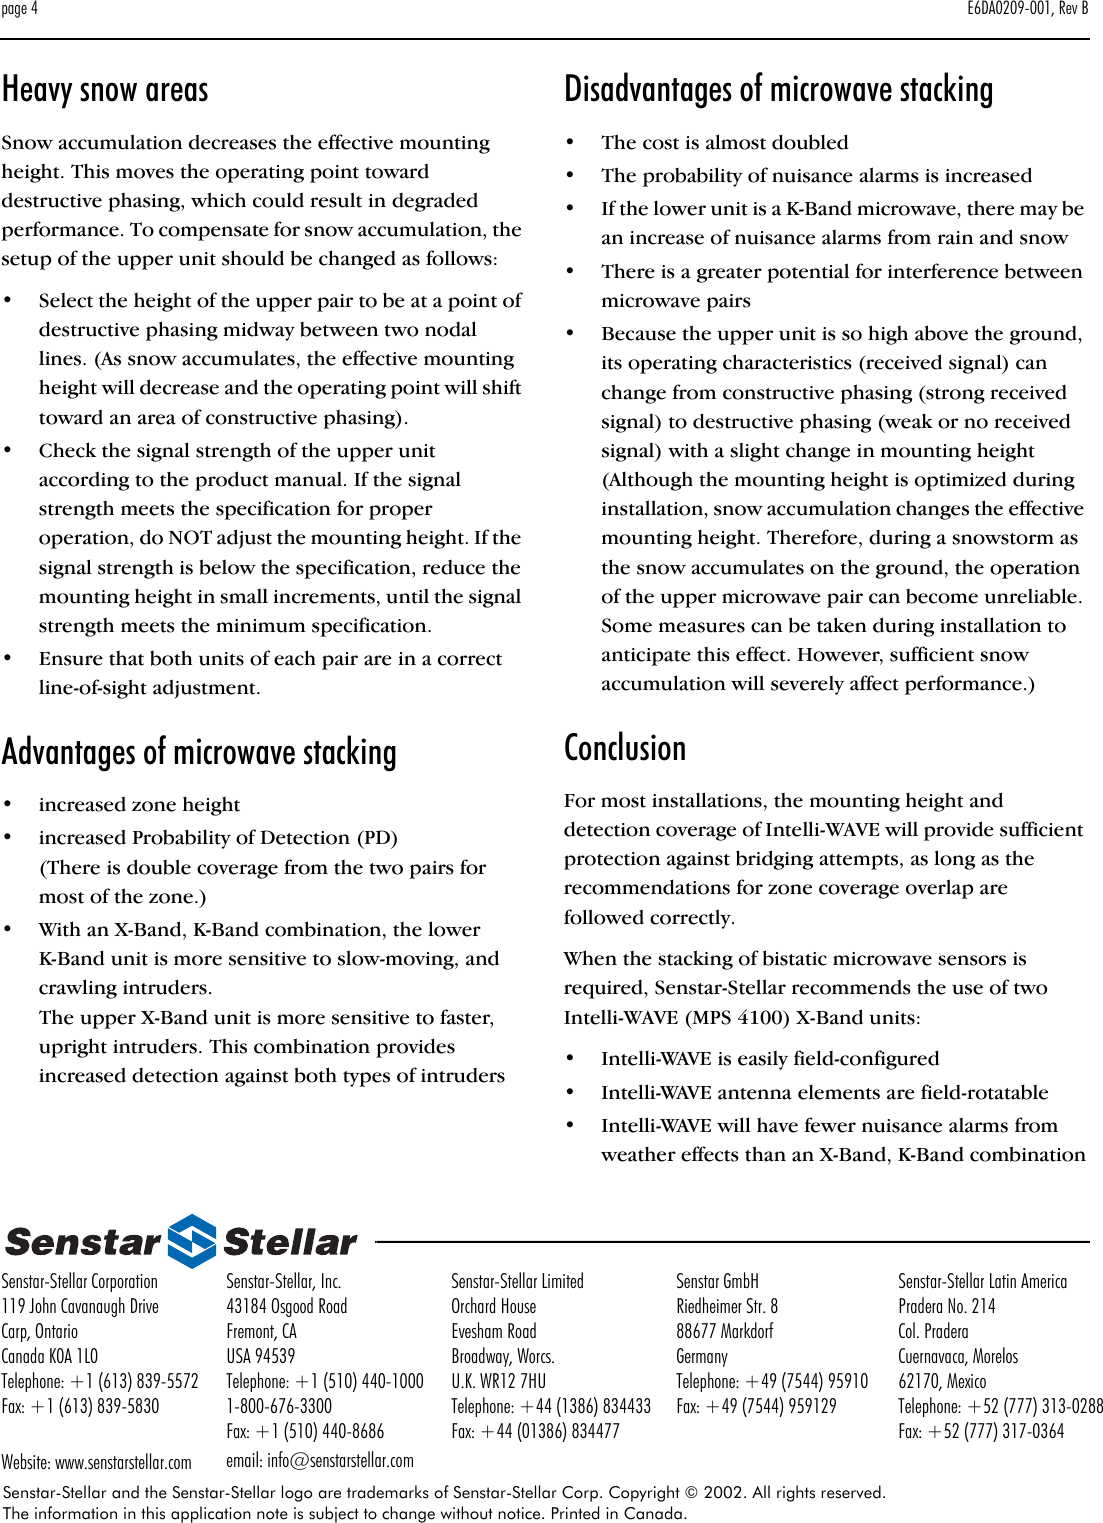 page 4 E6DA0209-001, Rev BSenstar-Stellar and the Senstar-Stellar logo are trademarks of Senstar-Stellar Corp. Copyright © 2002. All rights reserved. The information in this application note is subject to change without notice. Printed in Canada.Senstar-Stellar Corporation119 John Cavanaugh DriveCarp, OntarioCanada K0A 1L0Telephone: +1 (613) 839-5572Fax: +1 (613) 839-5830Website: www.senstarstellar.comSenstar-Stellar, Inc.43184 Osgood RoadFremont, CAUSA 94539Telephone: +1 (510) 440-10001-800-676-3300Fax: +1 (510) 440-8686email: info@senstarstellar.comSenstar-Stellar LimitedOrchard HouseEvesham RoadBroadway, Worcs.U.K. WR12 7HUTelephone: +44 (1386) 834433Fax: +44 (01386) 834477Senstar GmbHRiedheimer Str. 888677 MarkdorfGermanyTelephone: +49 (7544) 95910Fax: +49 (7544) 959129Senstar-Stellar Latin AmericaPradera No. 214Col. PraderaCuernavaca, Morelos62170, MexicoTelephone: +52 (777) 313-0288Fax: +52 (777) 317-0364Heavy snow areasSnow accumulation decreases the effective mounting height. This moves the operating point toward destructive phasing, which could result in degraded performance. To compensate for snow accumulation, the setup of the upper unit should be changed as follows:•Select the height of the upper pair to be at a point of destructive phasing midway between two nodal lines. (As snow accumulates, the effective mounting height will decrease and the operating point will shift toward an area of constructive phasing).•Check the signal strength of the upper unit according to the product manual. If the signal strength meets the specification for proper operation, do NOT adjust the mounting height. If the signal strength is below the specification, reduce the mounting height in small increments, until the signal strength meets the minimum specification.•Ensure that both units of each pair are in a correct line-of-sight adjustment.Advantages of microwave stacking•increased zone height•increased Probability of Detection (PD)(There is double coverage from the two pairs for most of the zone.)•With an X-Band, K-Band combination, the lower K-Band unit is more sensitive to slow-moving, and crawling intruders. The upper X-Band unit is more sensitive to faster, upright intruders. This combination provides increased detection against both types of intrudersDisadvantages of microwave stacking•The cost is almost doubled•The probability of nuisance alarms is increased•If the lower unit is a K-Band microwave, there may be an increase of nuisance alarms from rain and snow•There is a greater potential for interference between microwave pairs•Because the upper unit is so high above the ground, its operating characteristics (received signal) can change from constructive phasing (strong received signal) to destructive phasing (weak or no received signal) with a slight change in mounting height (Although the mounting height is optimized during installation, snow accumulation changes the effective mounting height. Therefore, during a snowstorm as the snow accumulates on the ground, the operation of the upper microwave pair can become unreliable. Some measures can be taken during installation to anticipate this effect. However, sufficient snow accumulation will severely affect performance.)ConclusionFor most installations, the mounting height and detection coverage of Intelli-WAVE will provide sufficient protection against bridging attempts, as long as the recommendations for zone coverage overlap are followed correctly.When the stacking of bistatic microwave sensors is required, Senstar-Stellar recommends the use of two Intelli-WAVE (MPS 4100) X-Band units:•Intelli-WAVE is easily field-configured•Intelli-WAVE antenna elements are field-rotatable•Intelli-WAVE will have fewer nuisance alarms from weather effects than an X-Band, K-Band combination